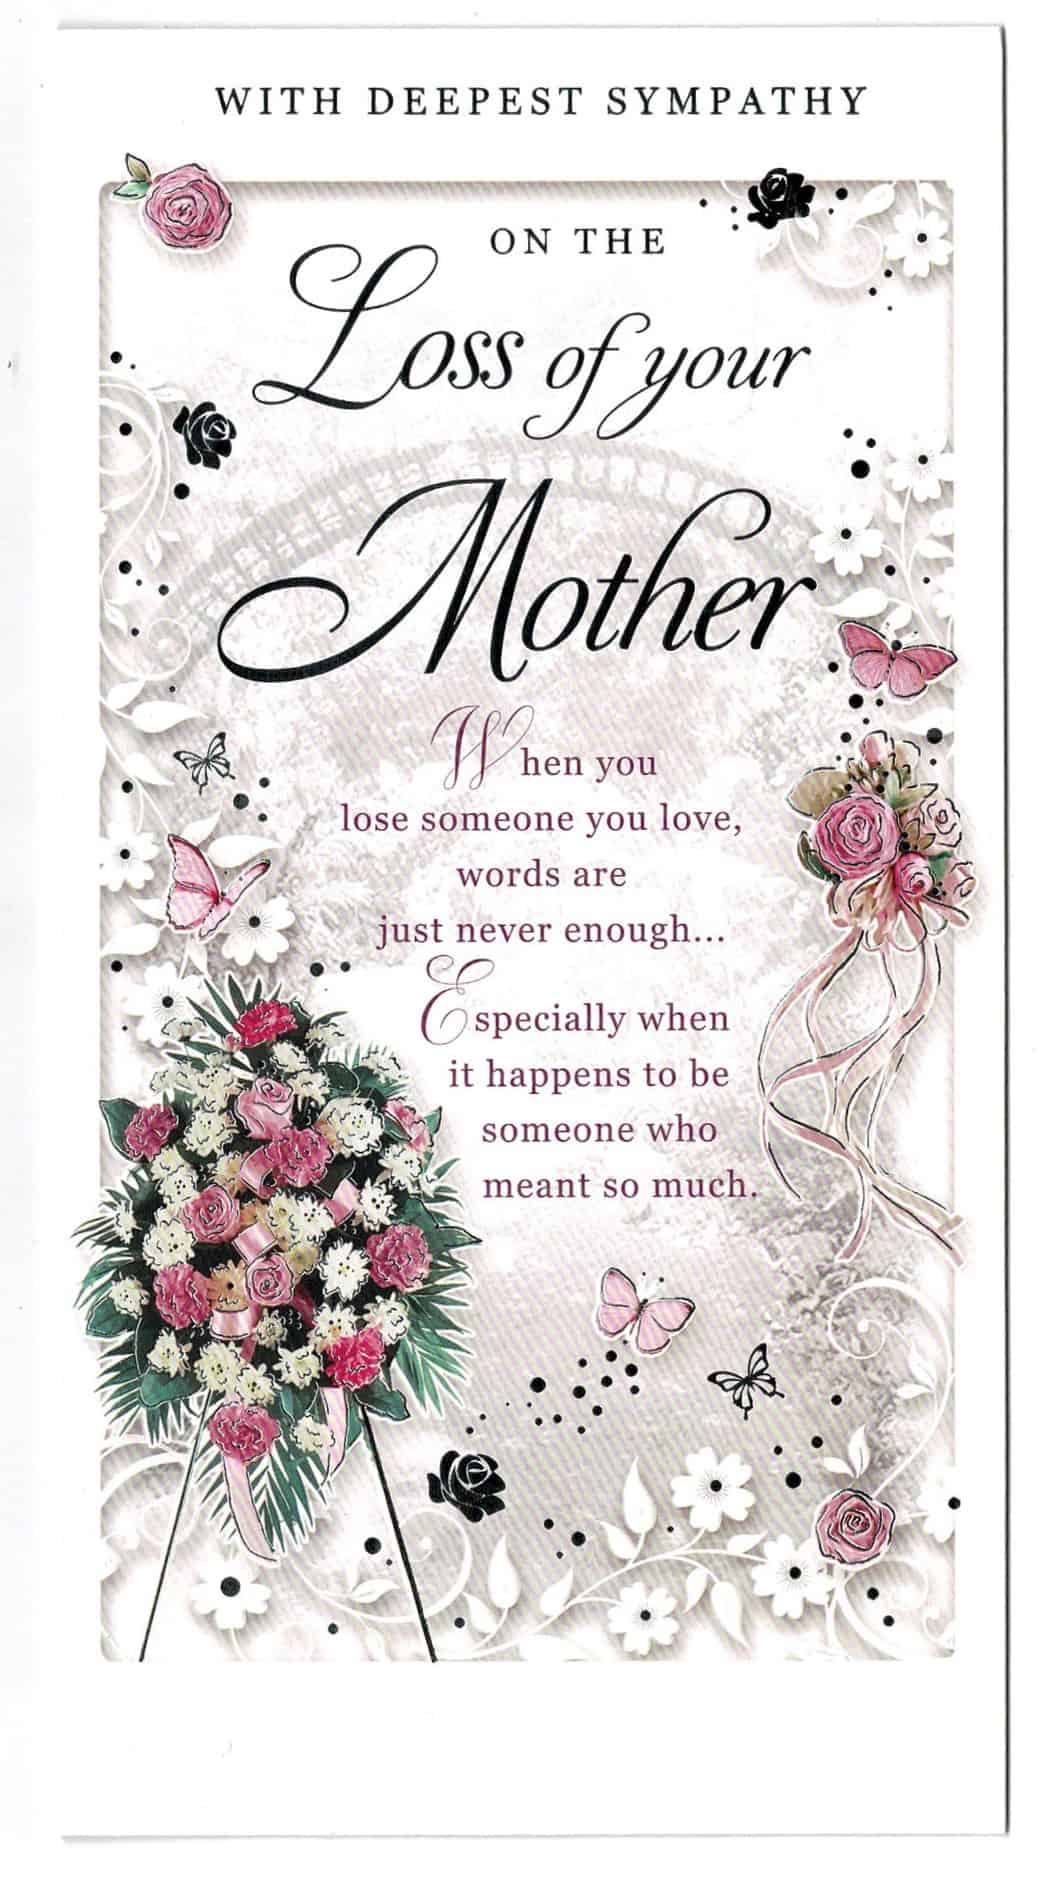 signing-a-sympathy-card-for-loss-of-mother-qcardg